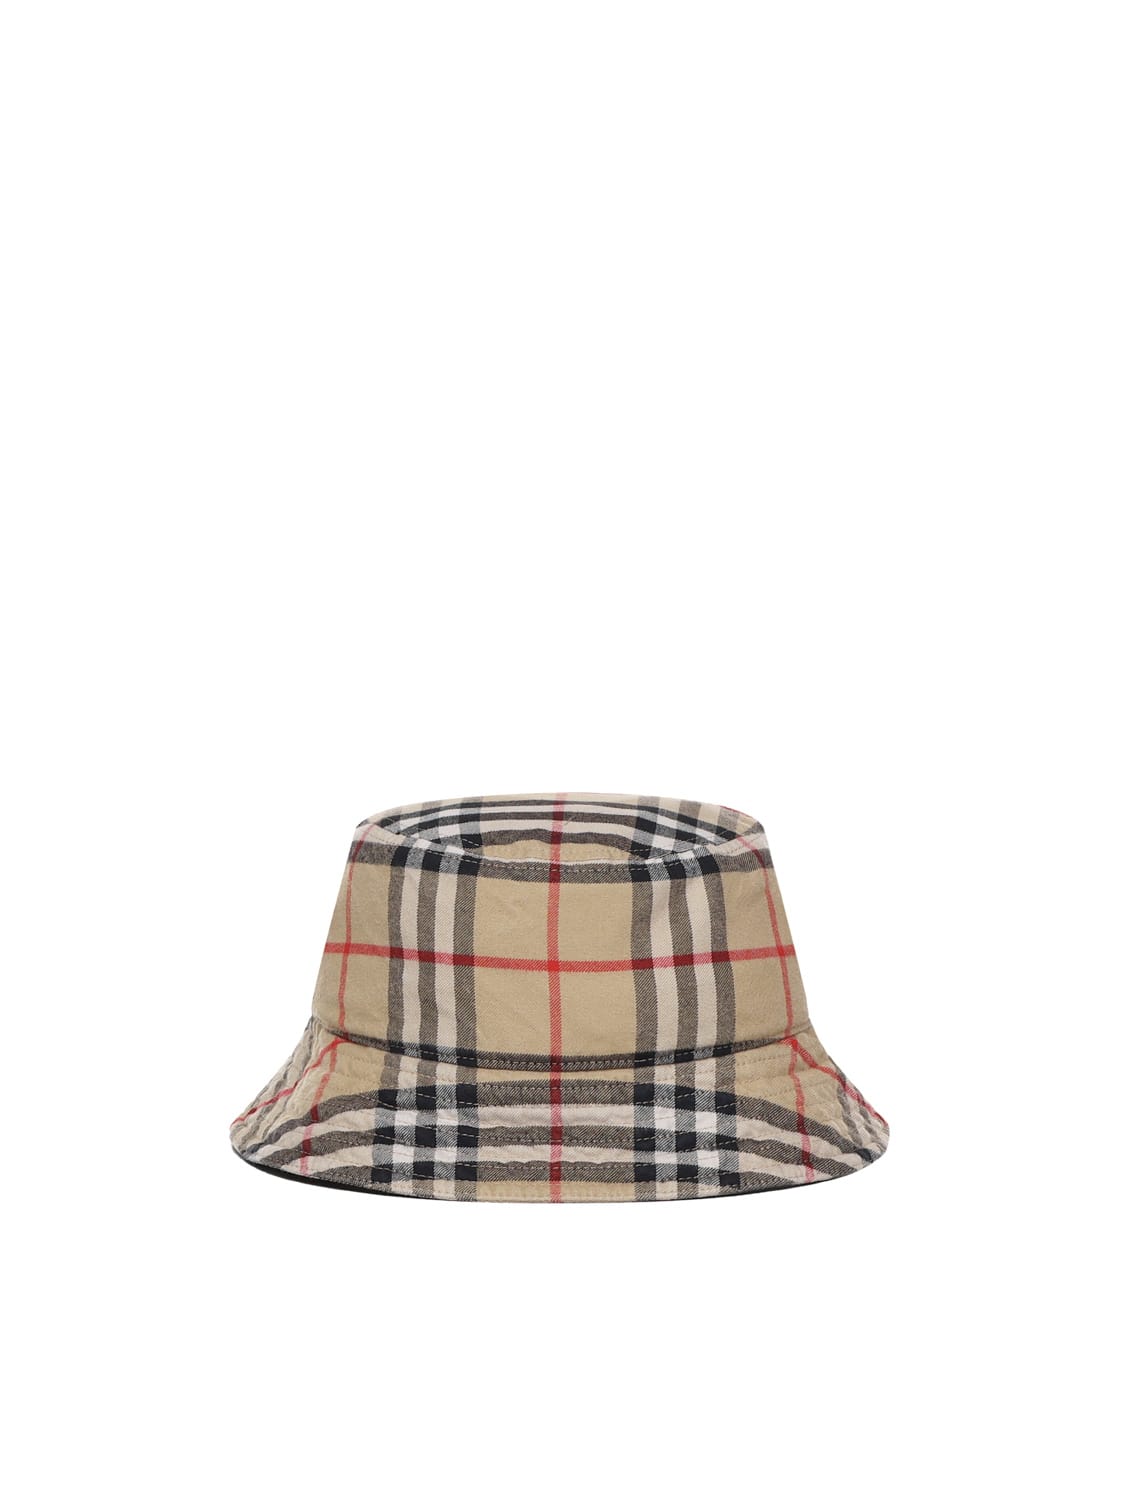 BURBERRY VINTAGE CHECK BUCKET HAT IN COTTON